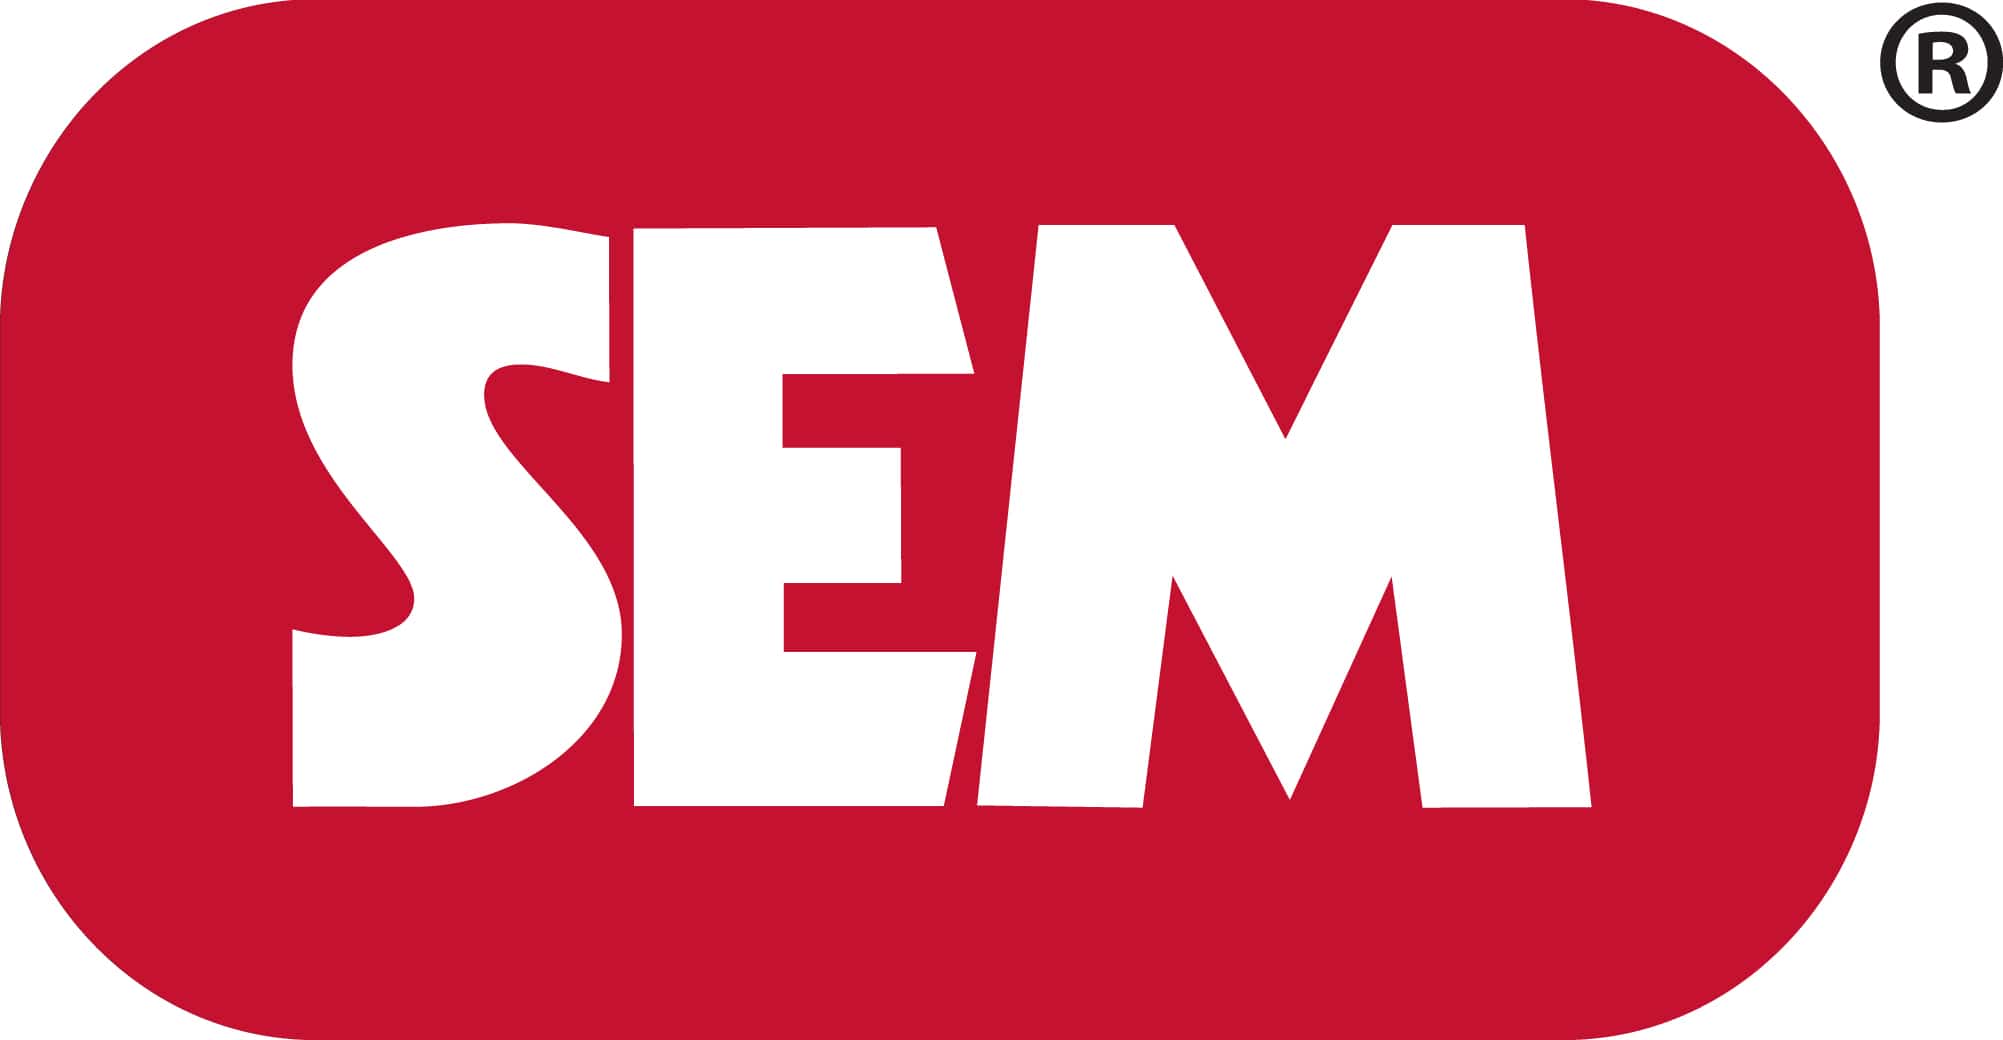 SEM PRODUCTS